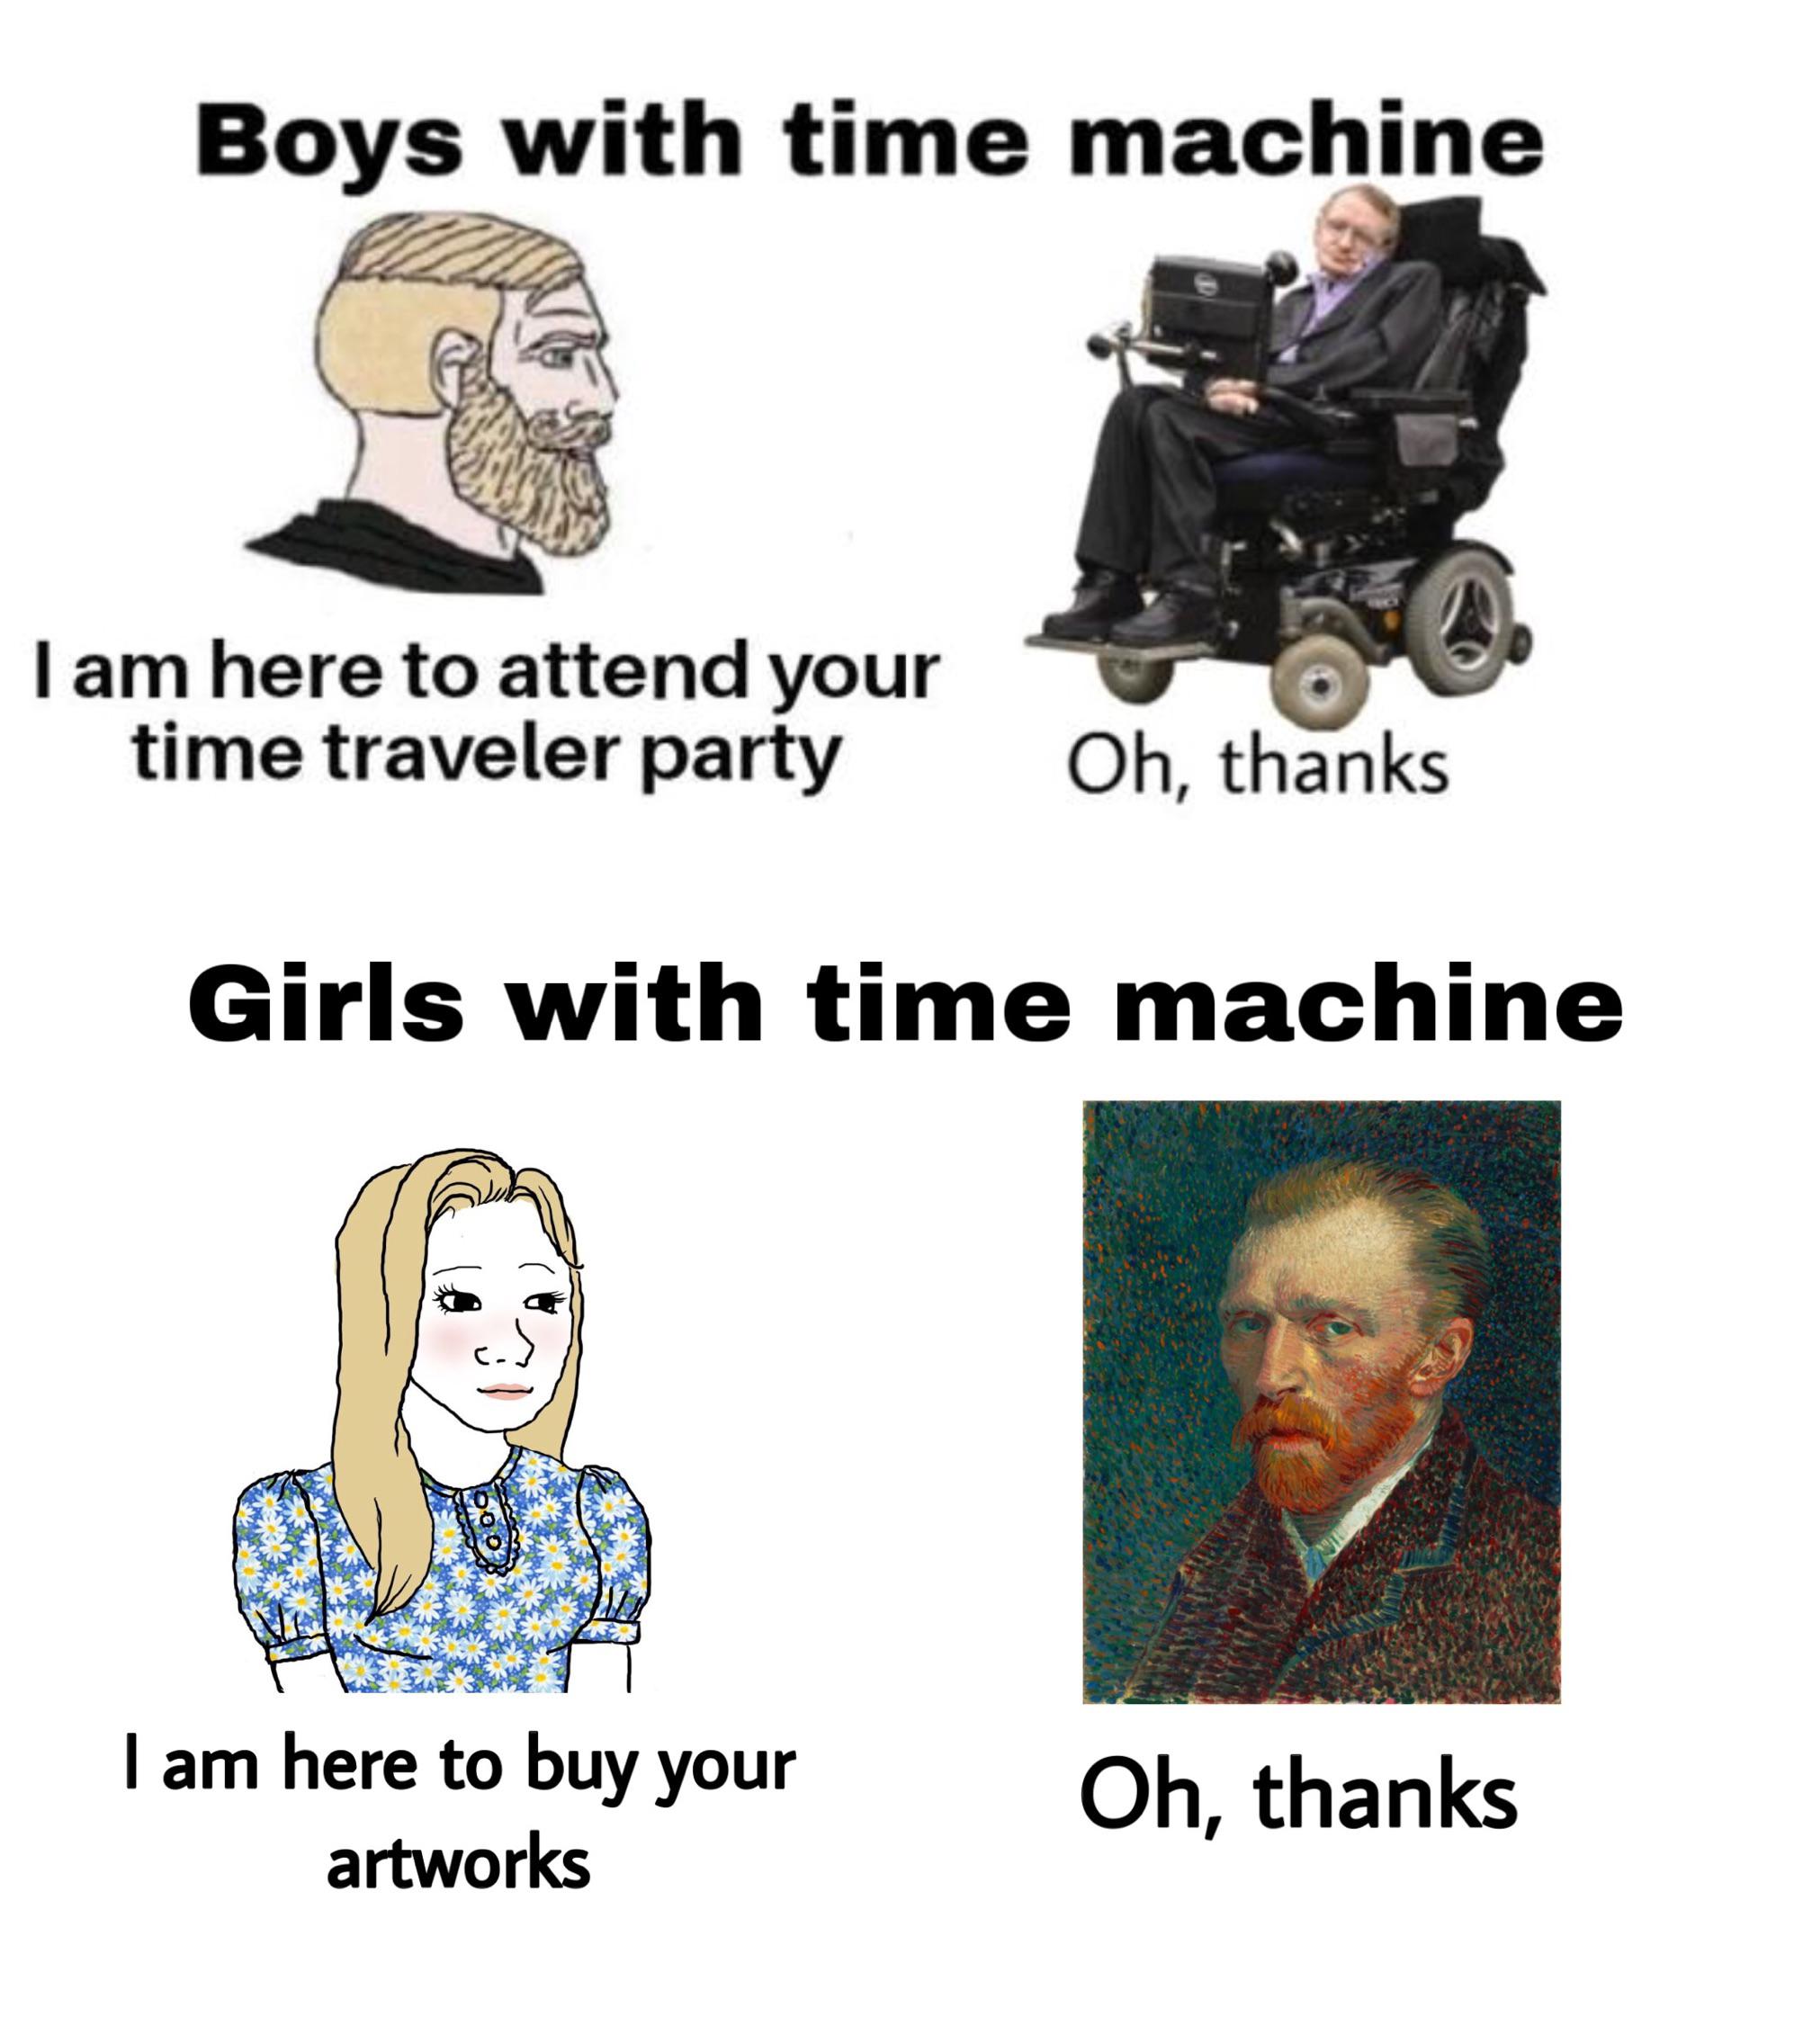 dank memes - vincent van gogh - Boys with time machine I am here to attend your time traveler party Oh, thanks Girls with time machine I am here to buy your artworks Oh, thanks